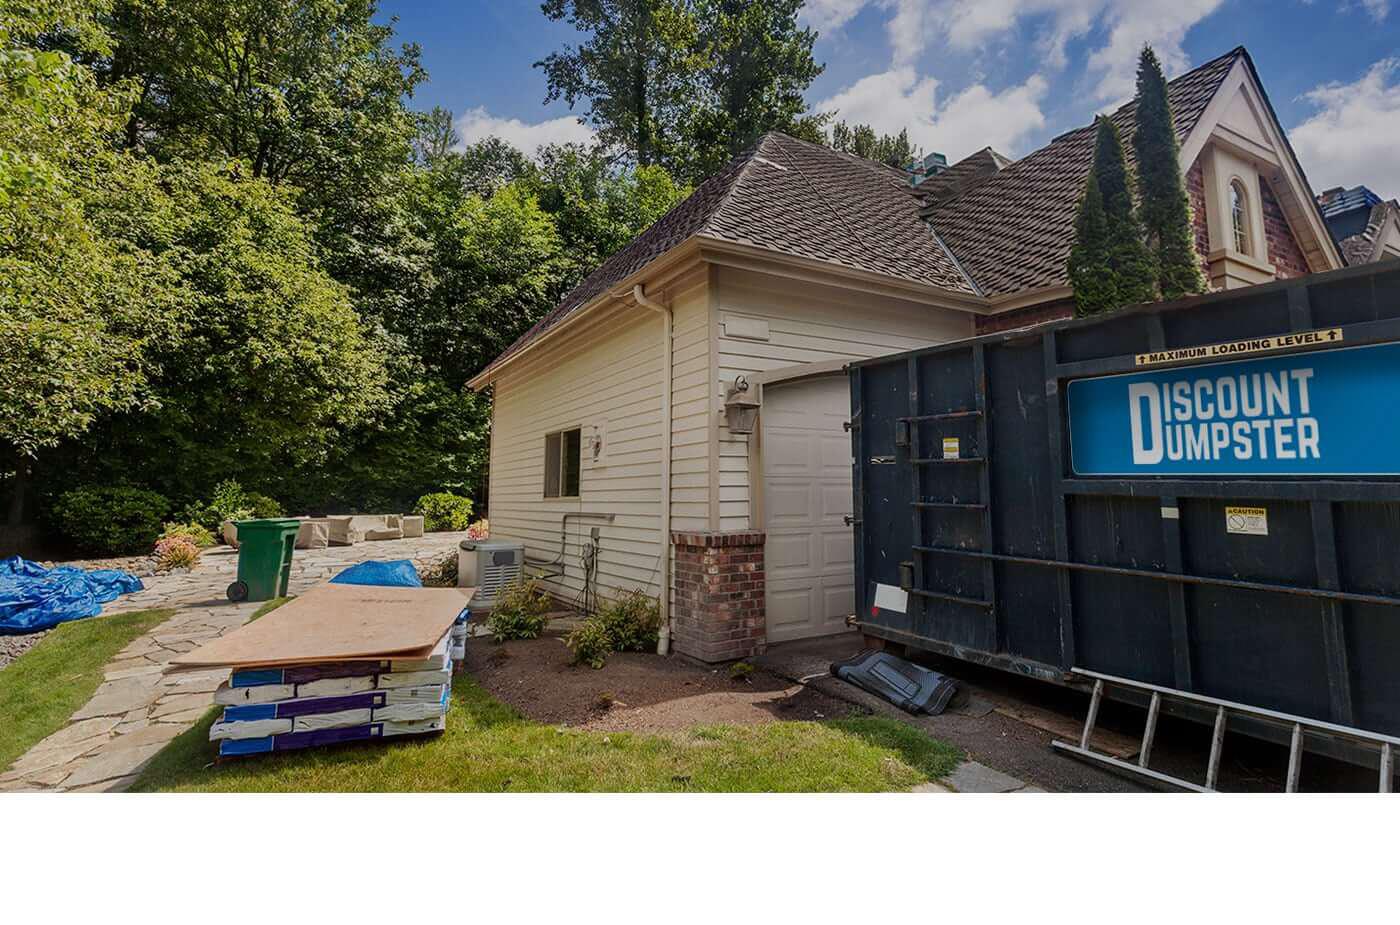 Discount dumpster is there for all your waste management needs for your next home improvement in Chi Discount Dumpster Chicago (312)549-9198